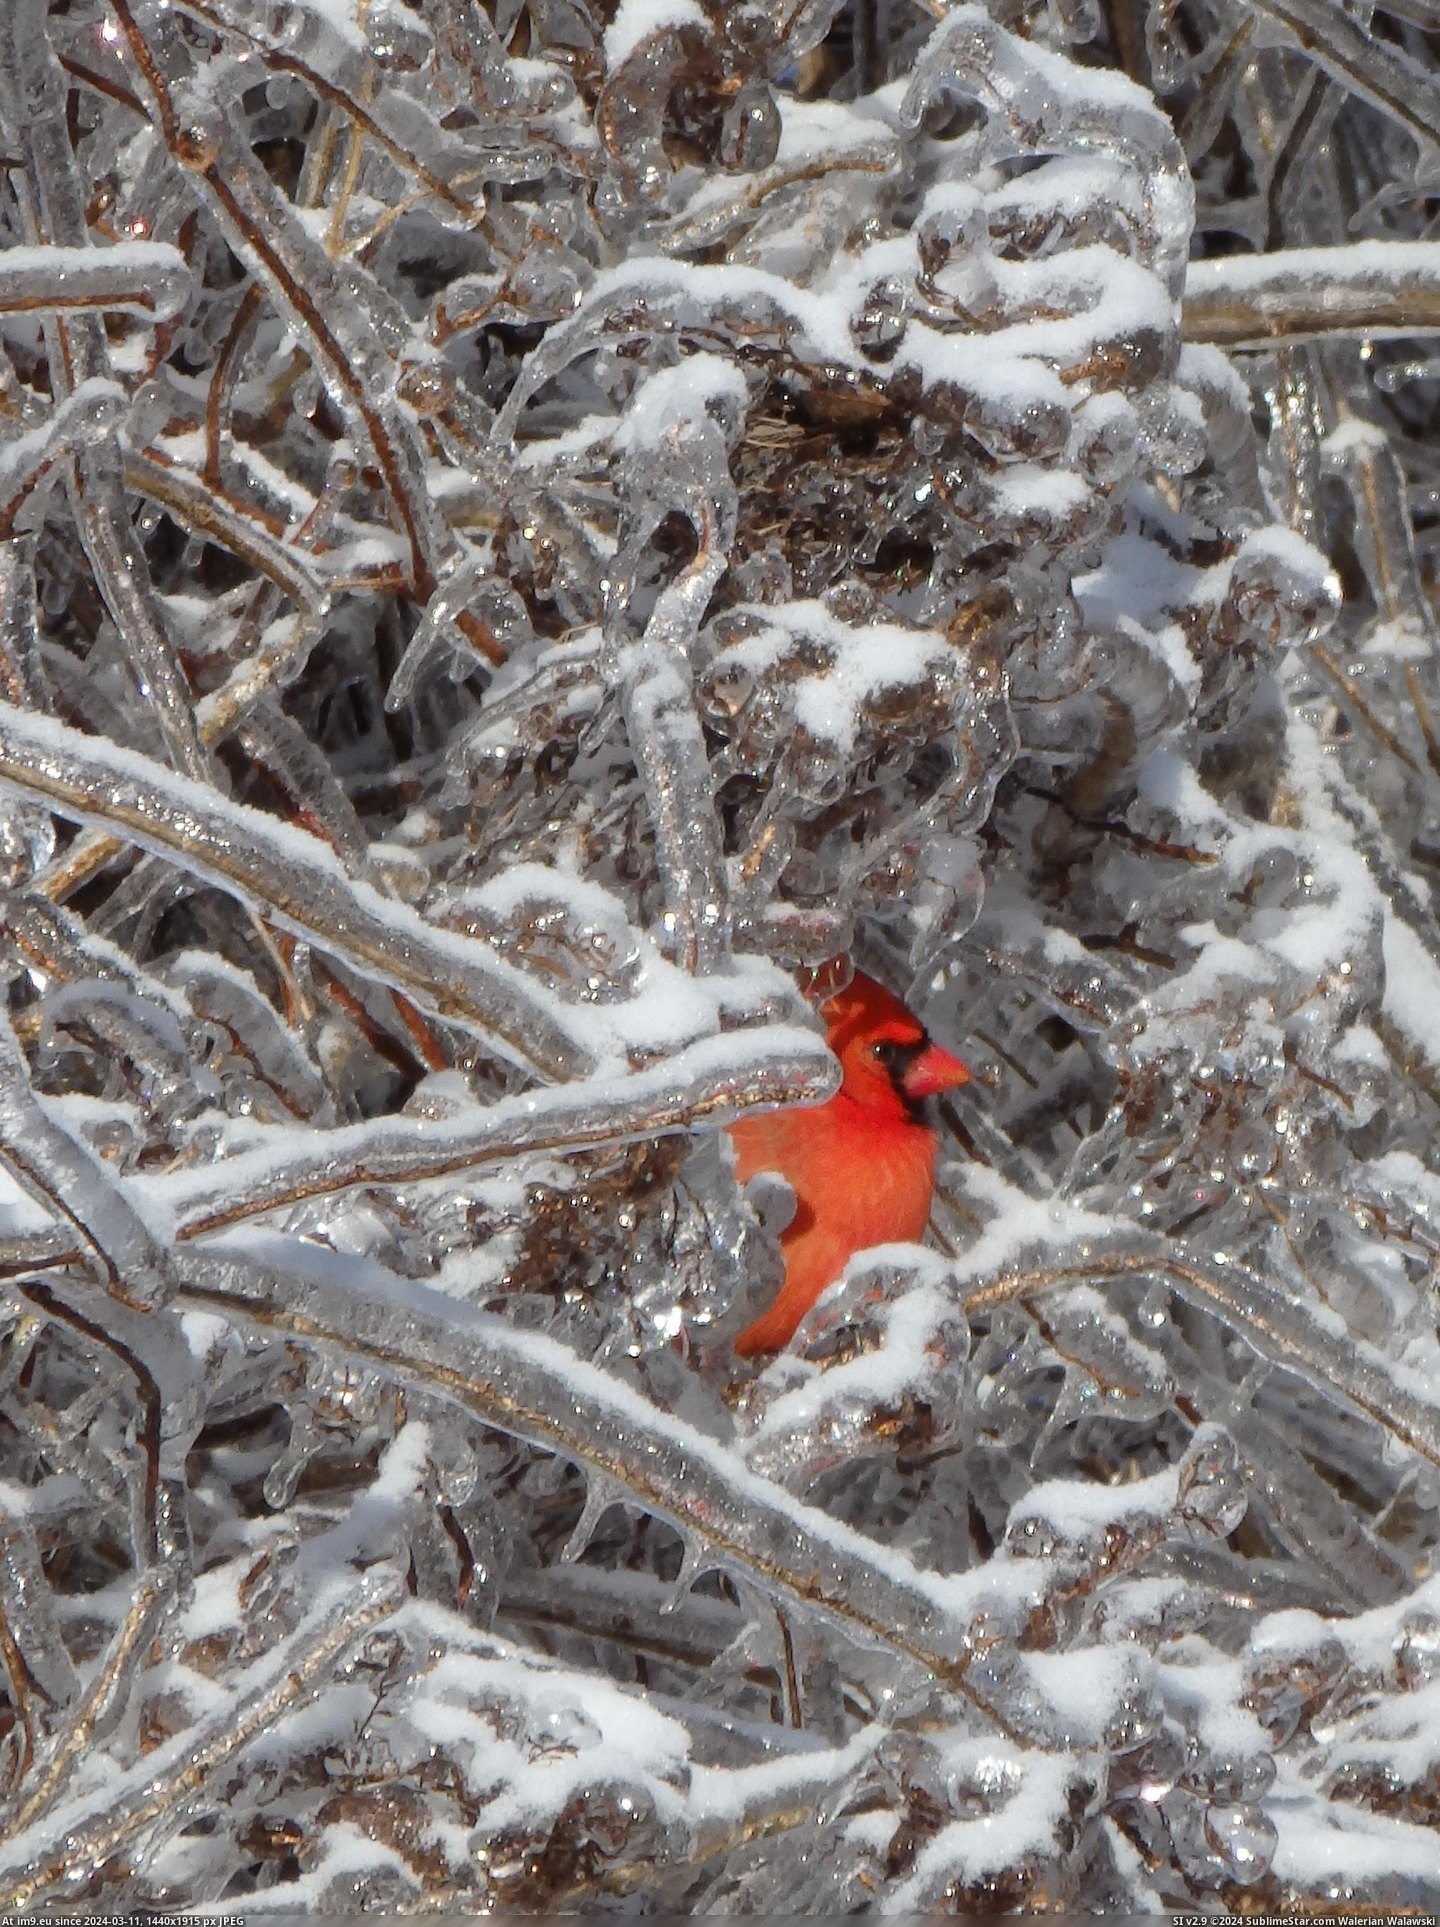 #Ice #Appeared #Cardinal #Storm [Pics] After the ice storm, a cardinal appeared (OC) Pic. (Bild von album My r/PICS favs))